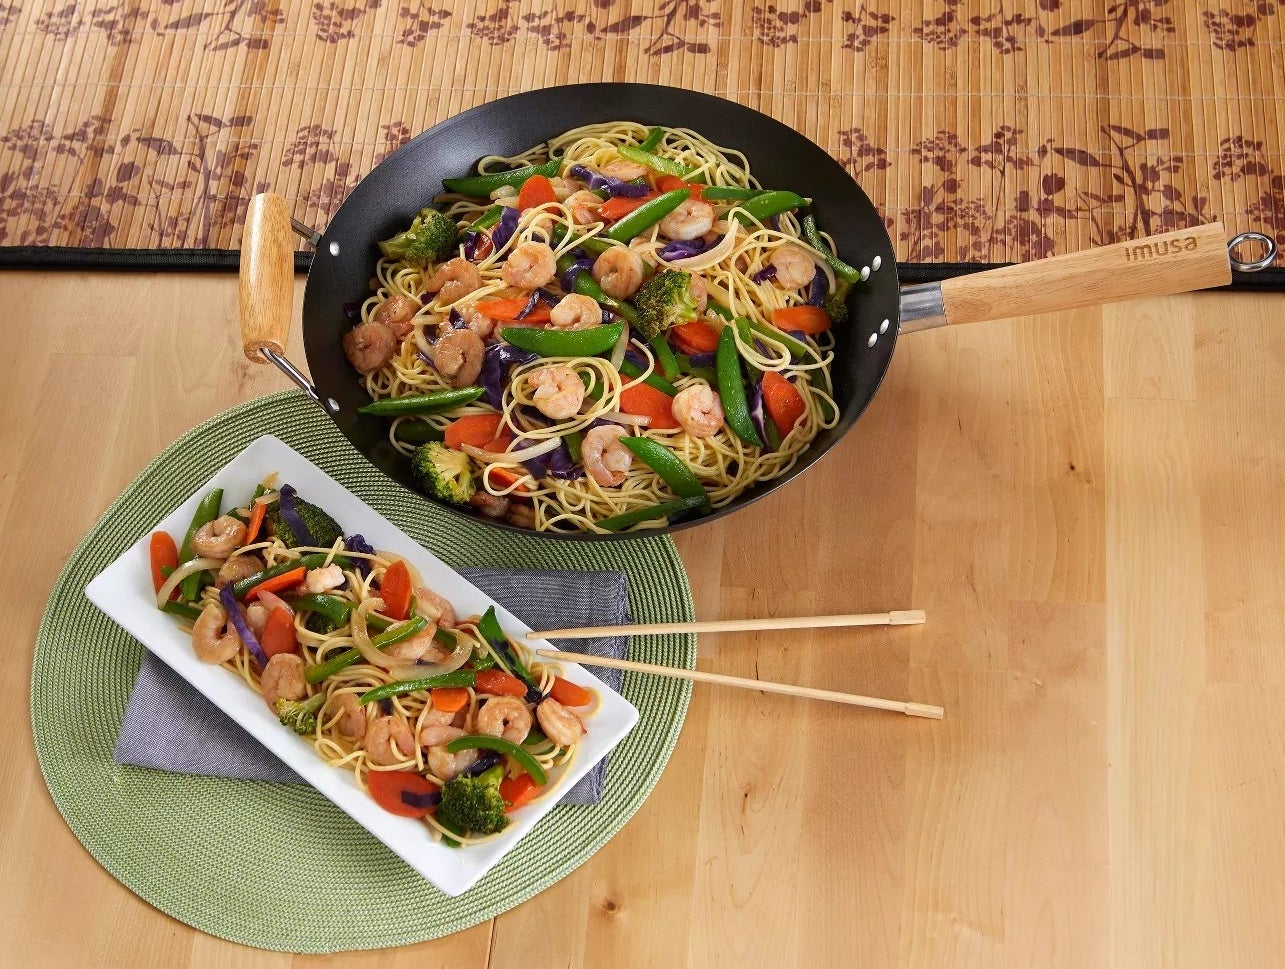 The imusa wok with wood handles